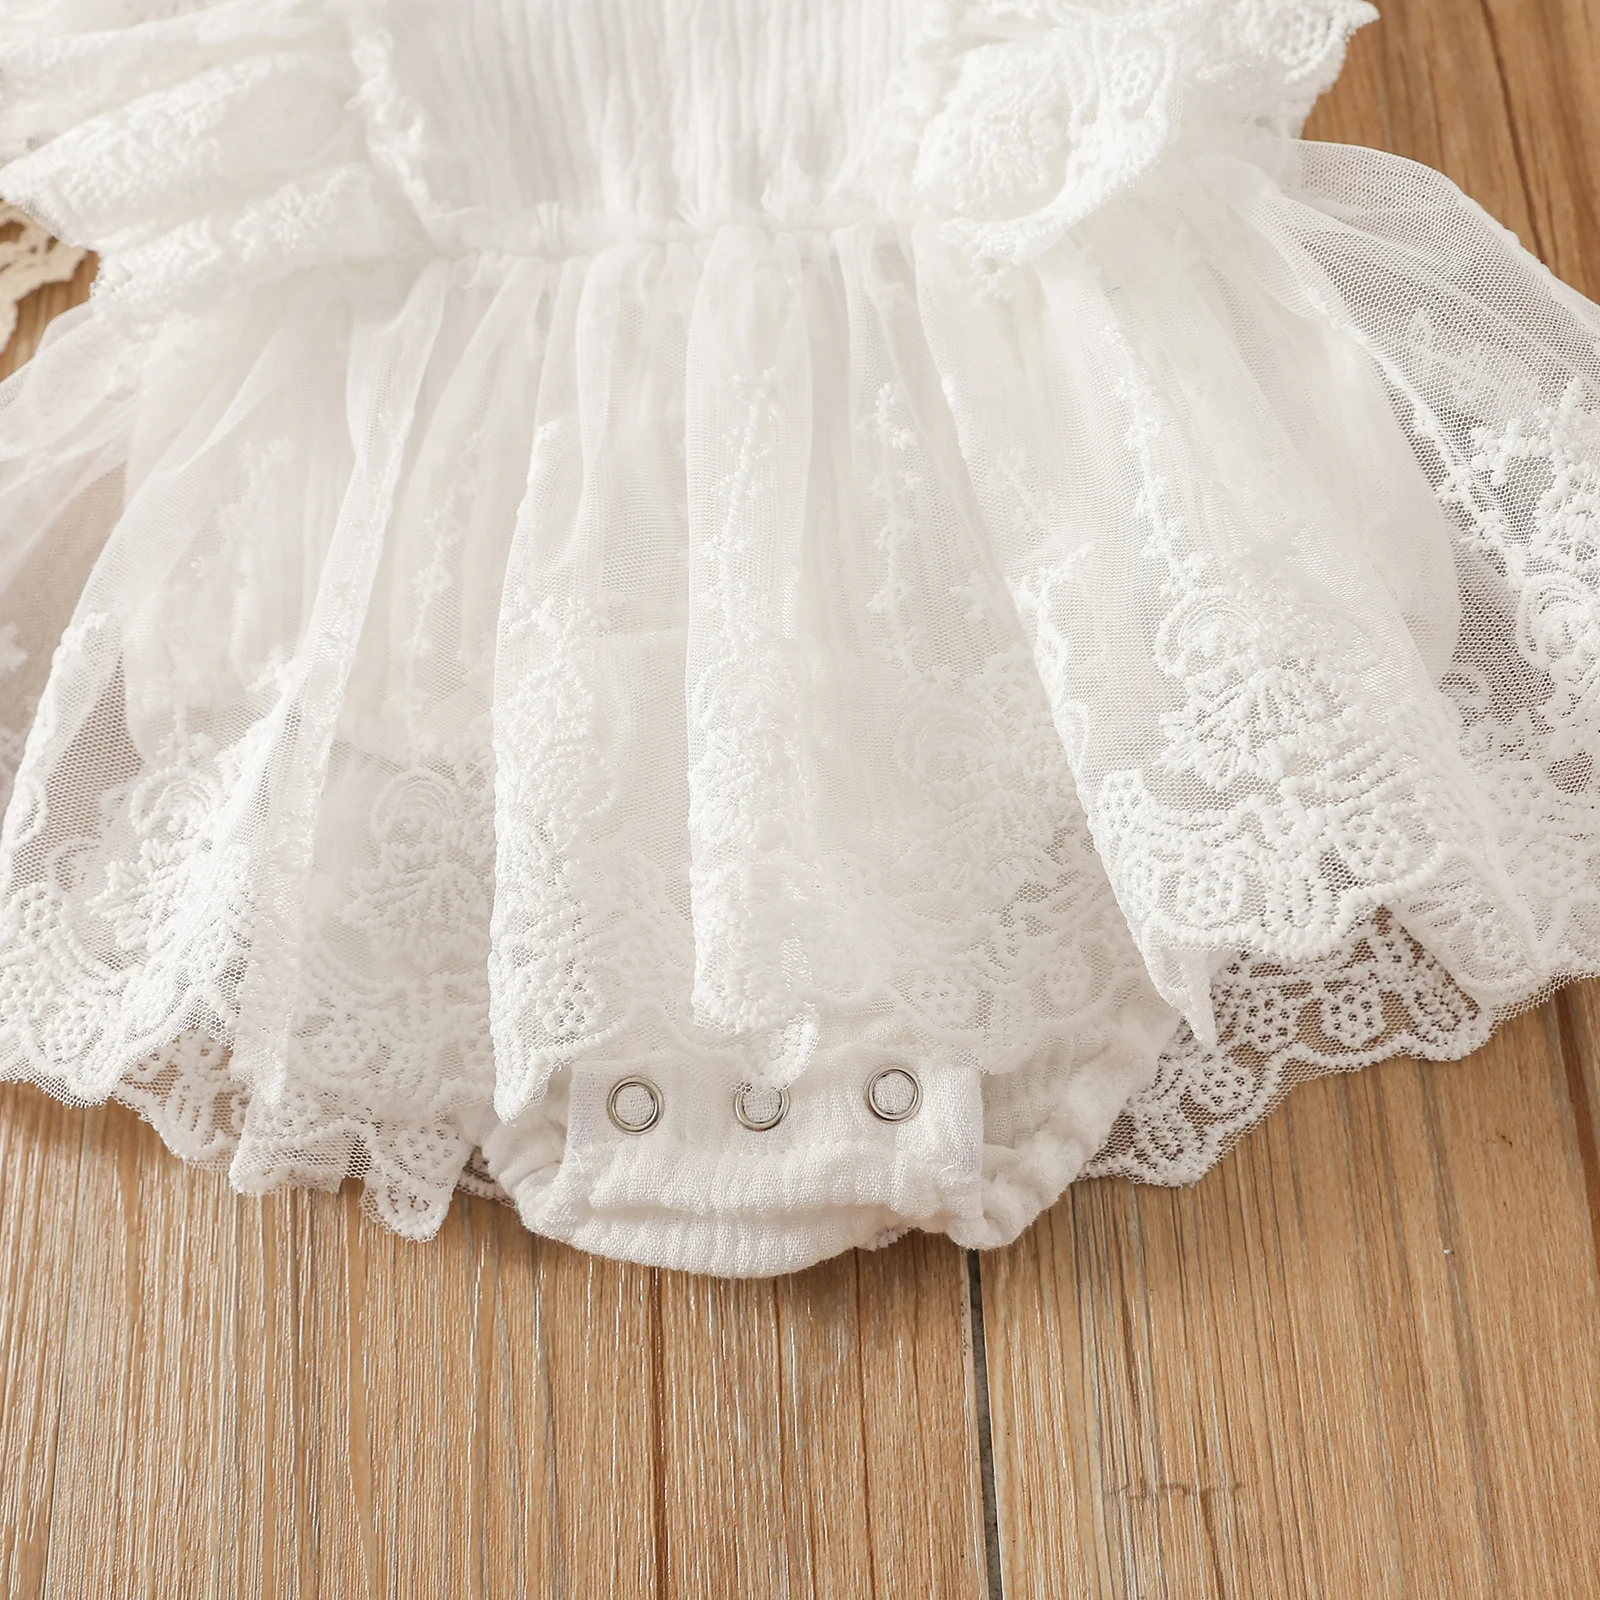 Cotton baby suit ma&baby 0-18M Summer Newborn Infant Baby Girl Romper Lace Ruffle Jumpsuit Princess Girls Birthday Party Costumes D01 Baby Bodysuits are cool